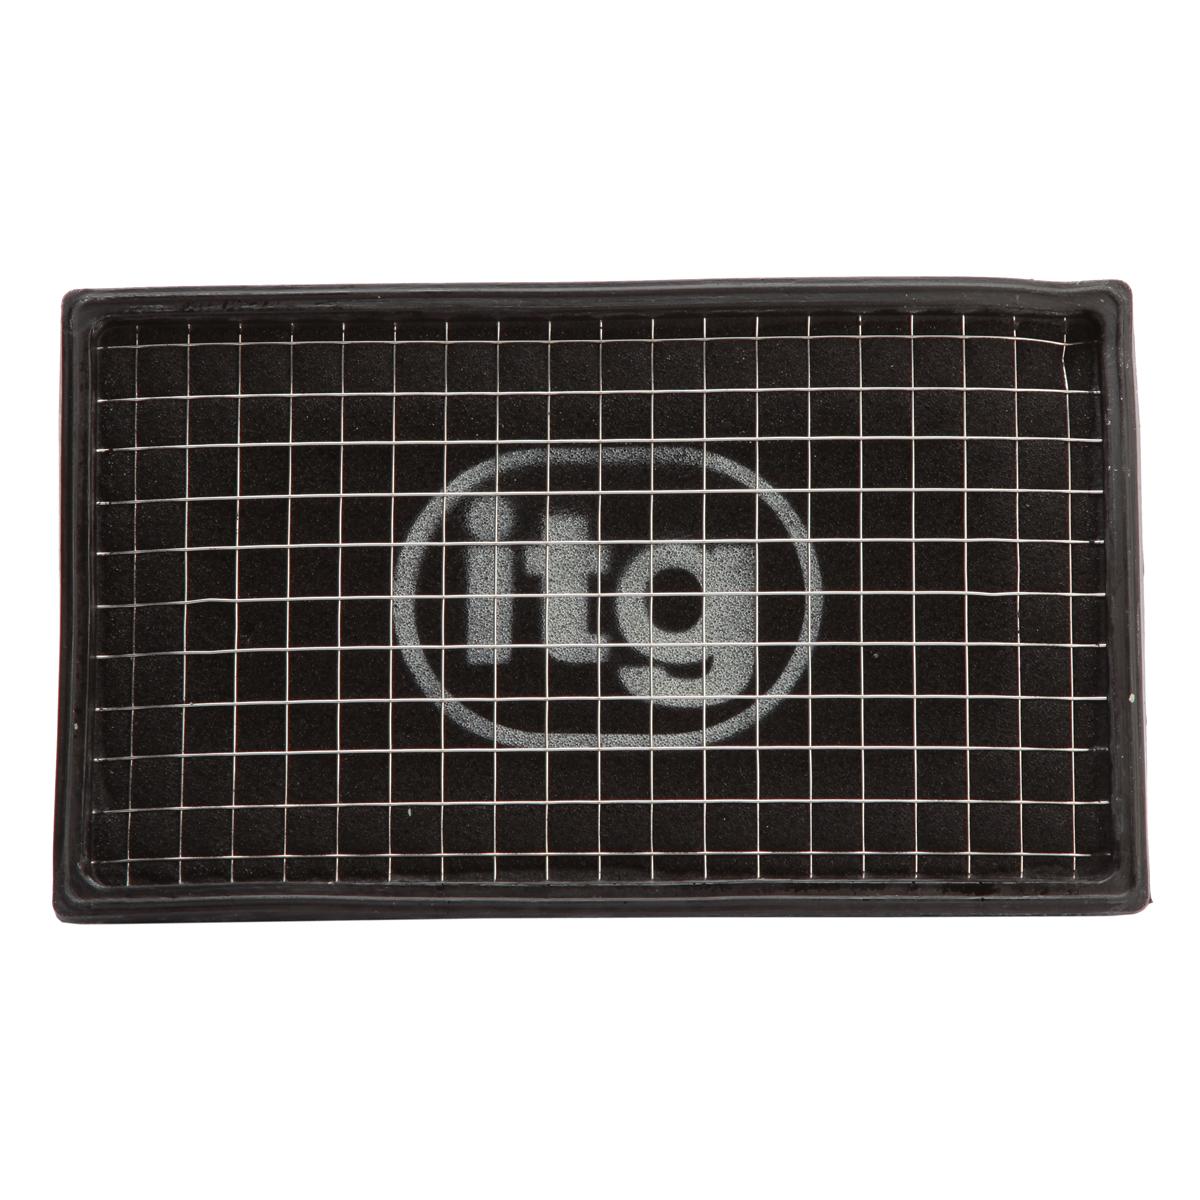 ITG Air Filter For Subaru Forester 2.0 (09/97>)